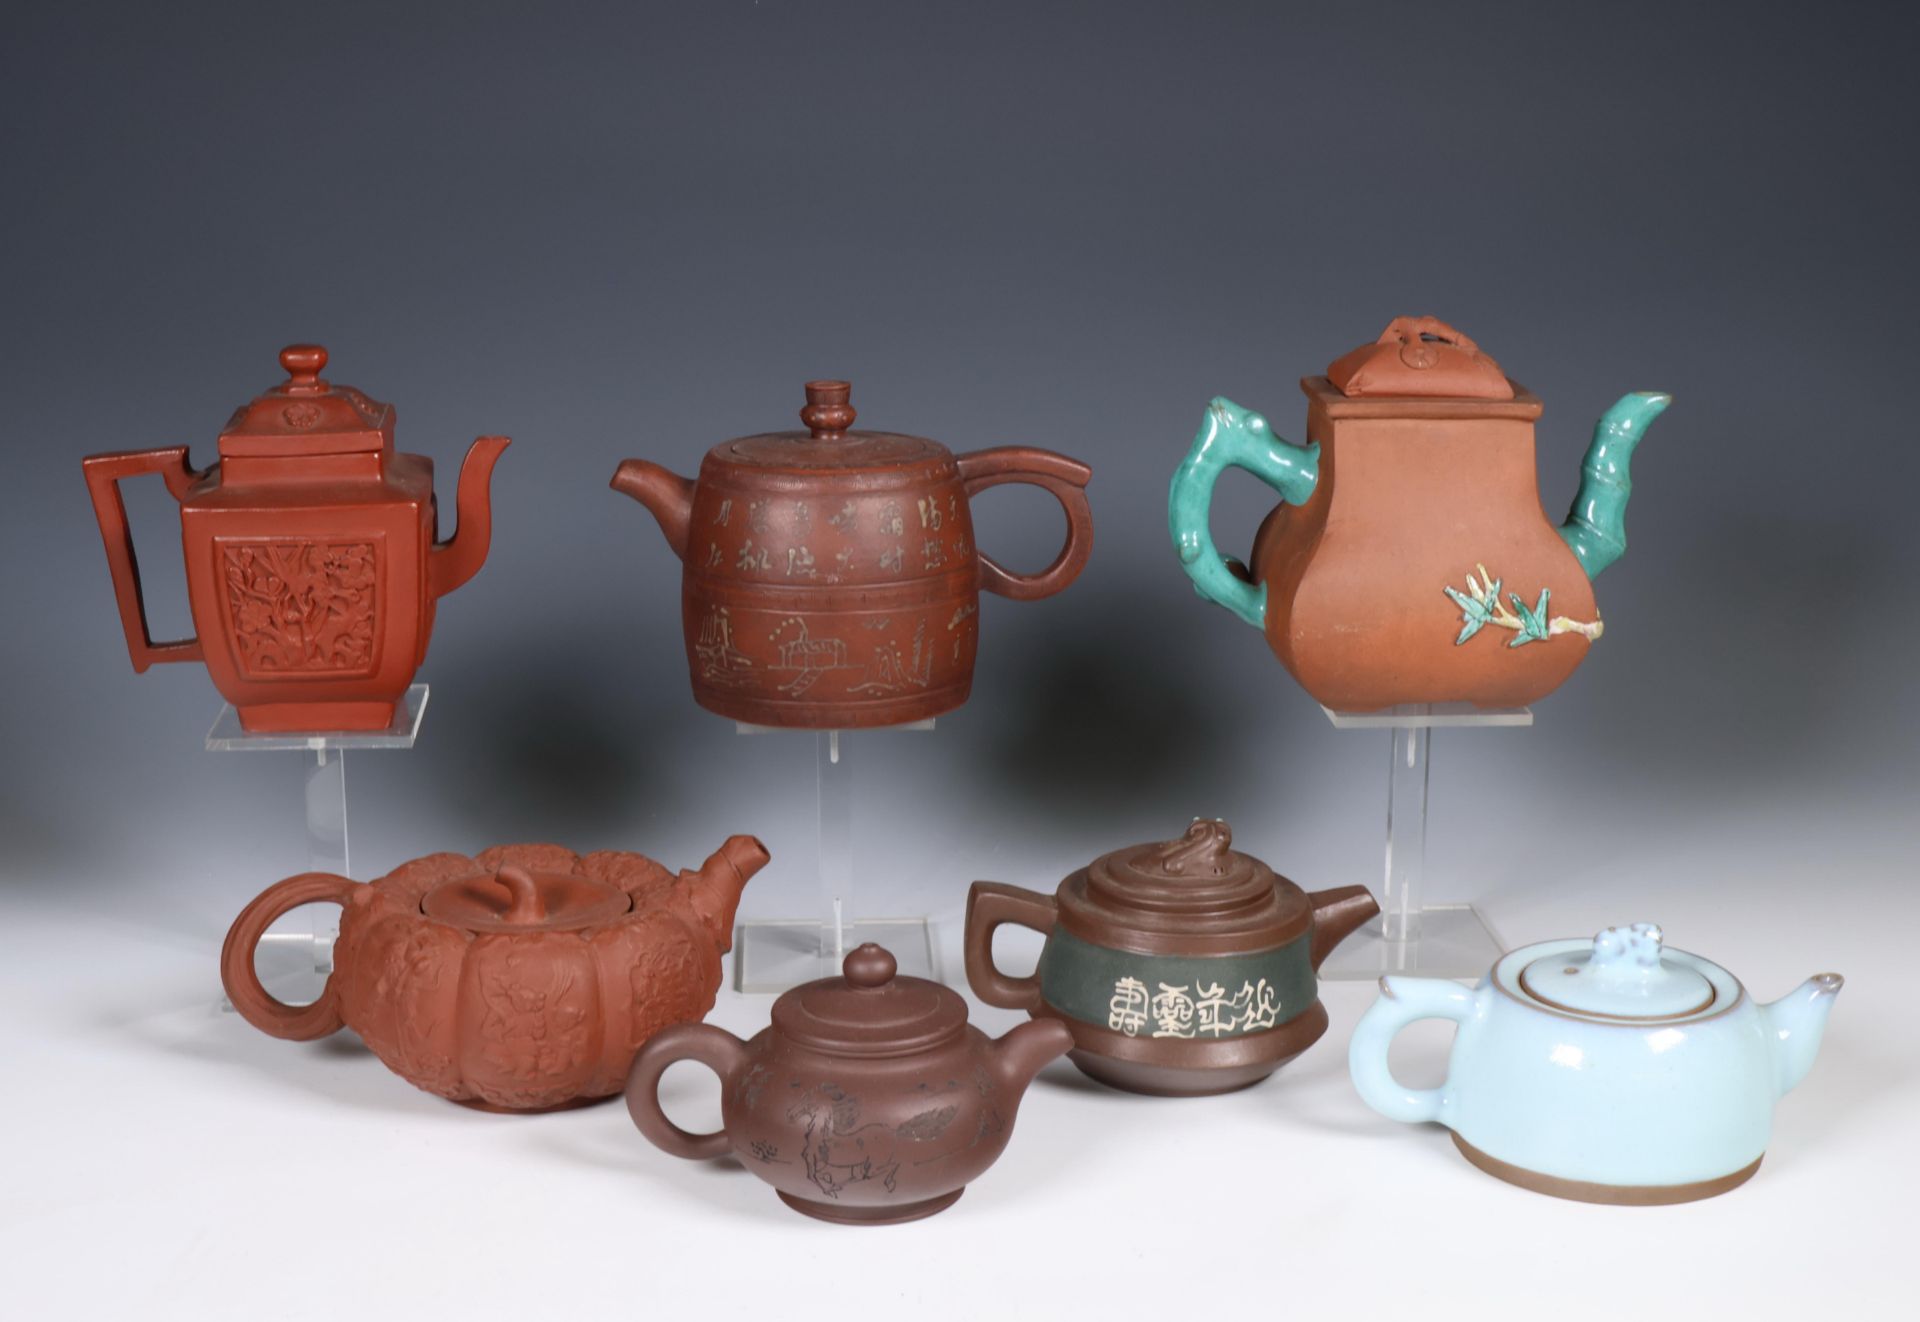 China, collection of Yixing earthenware teapots, cups and saucers, - Image 2 of 2